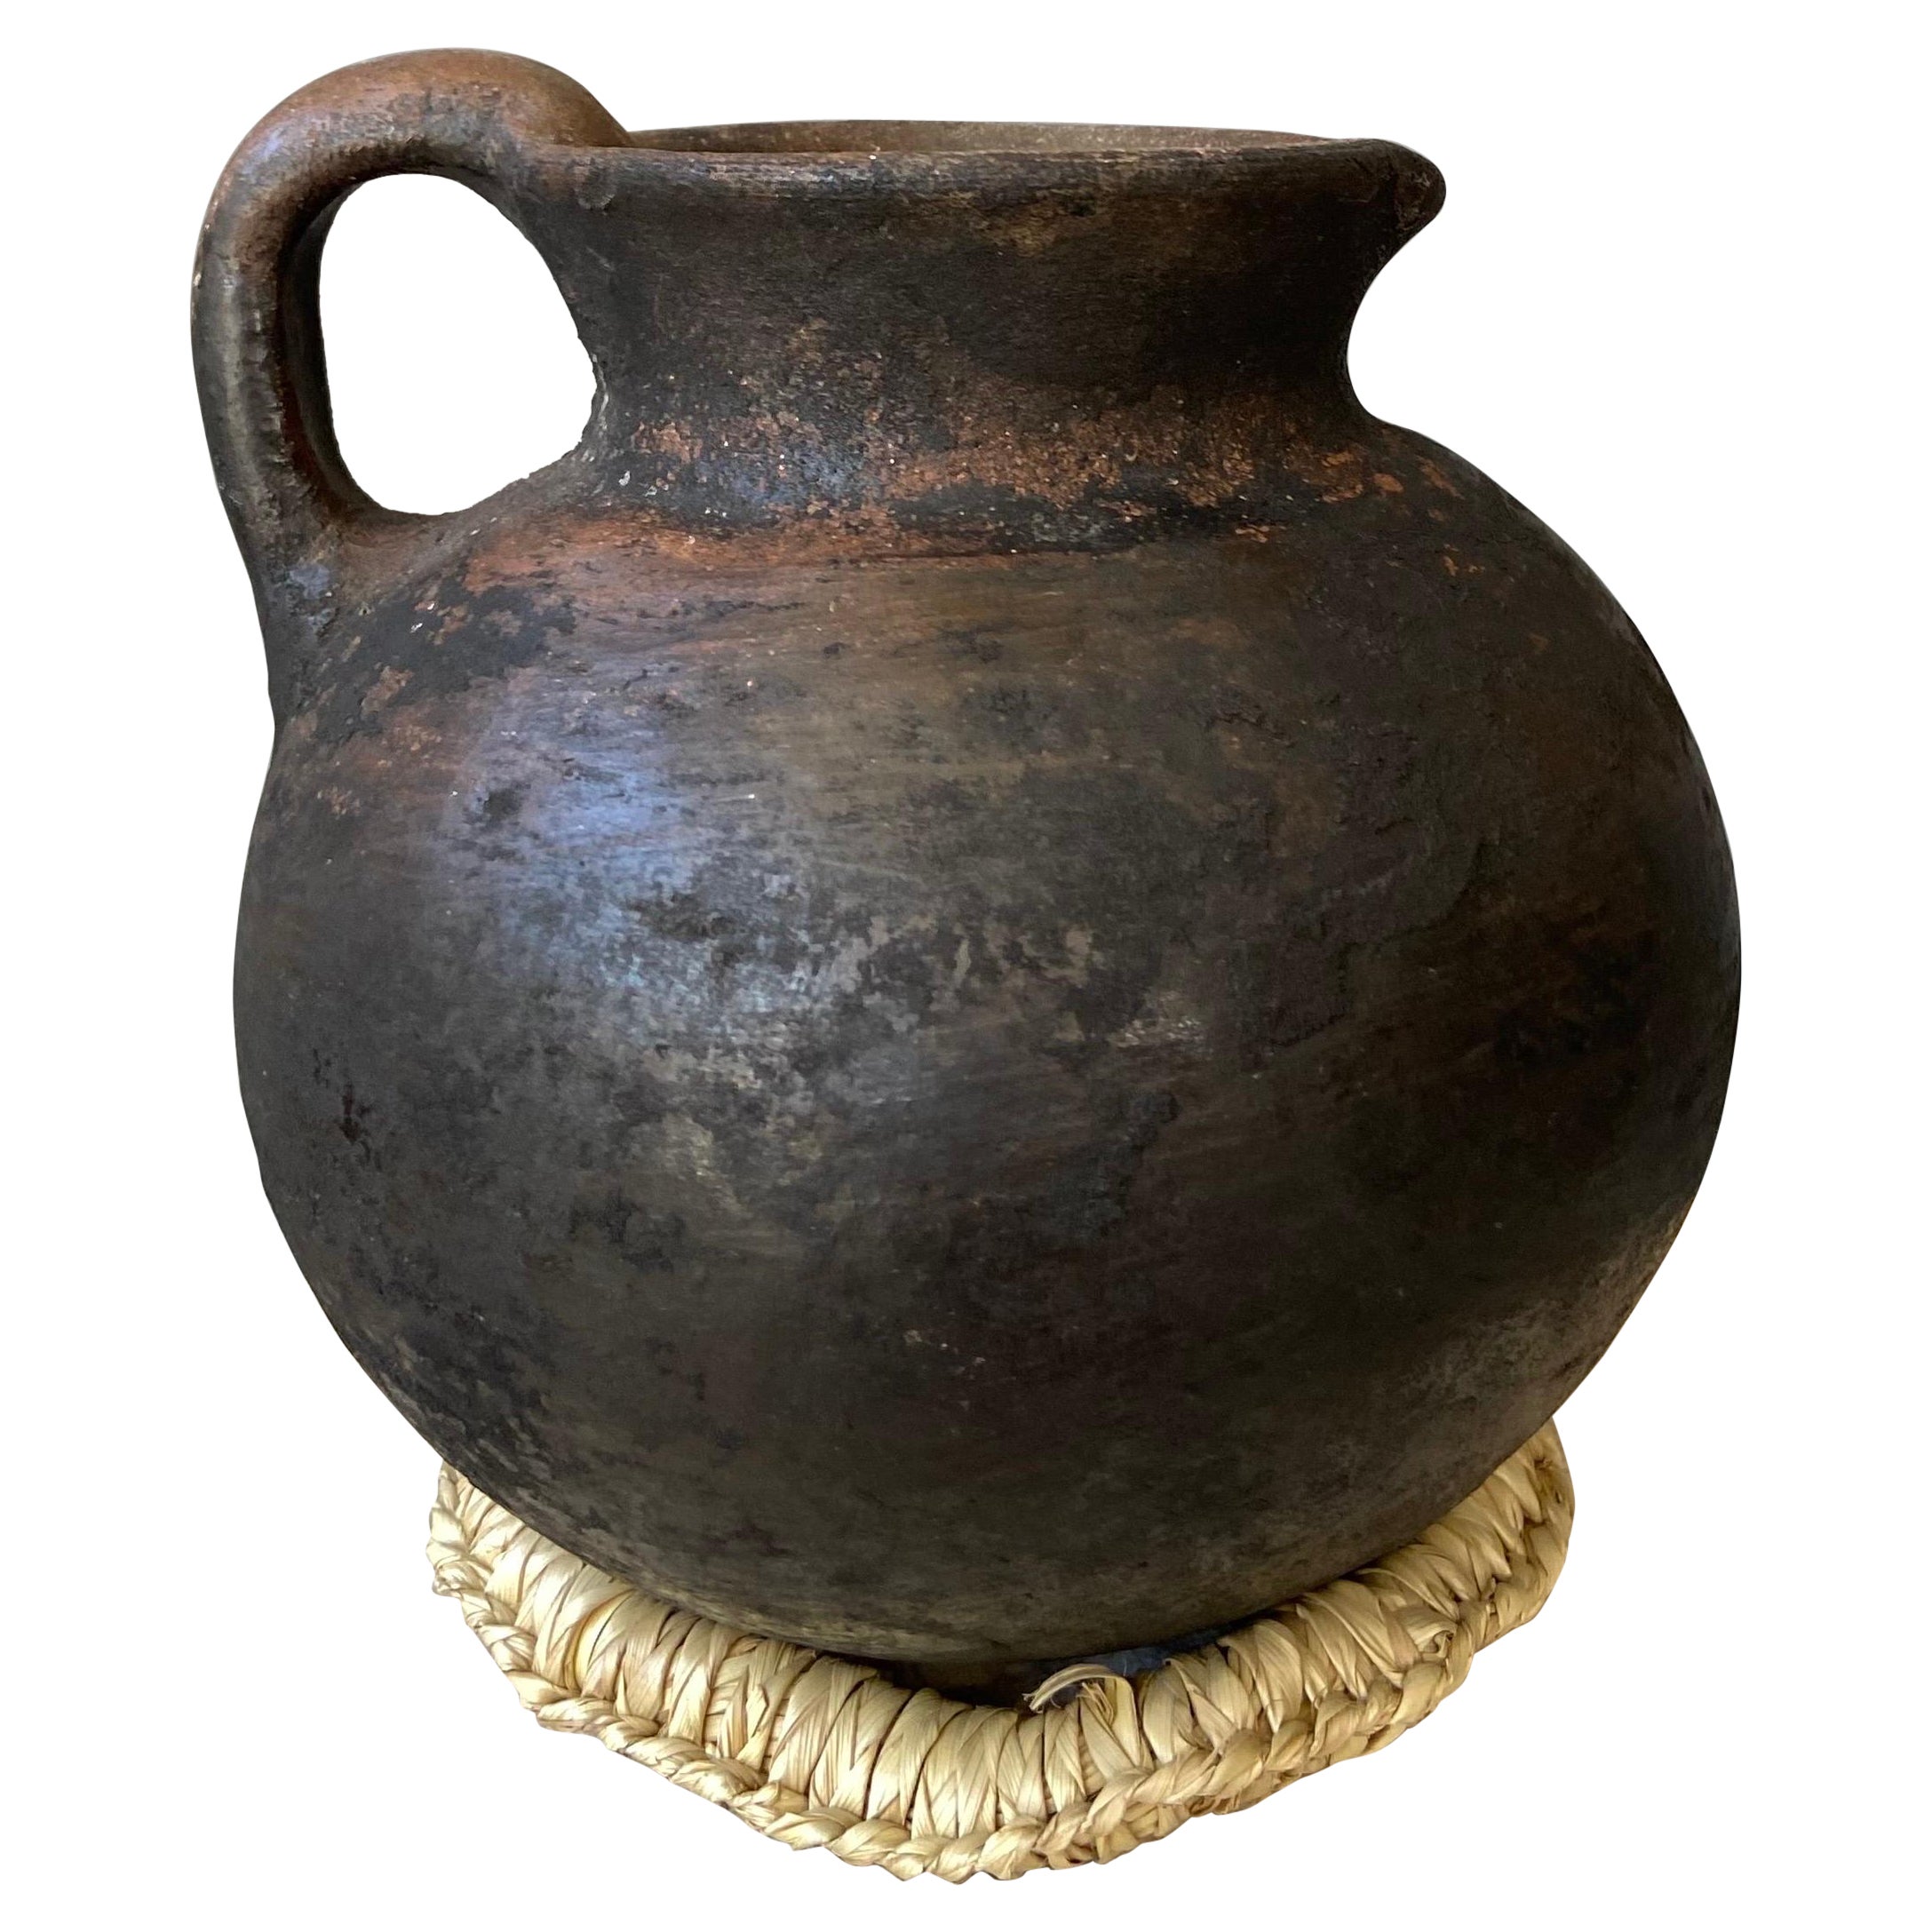 Primitive Styled Terracotta Pitcher From Oaxaca, Mexico, Circa 1970´s